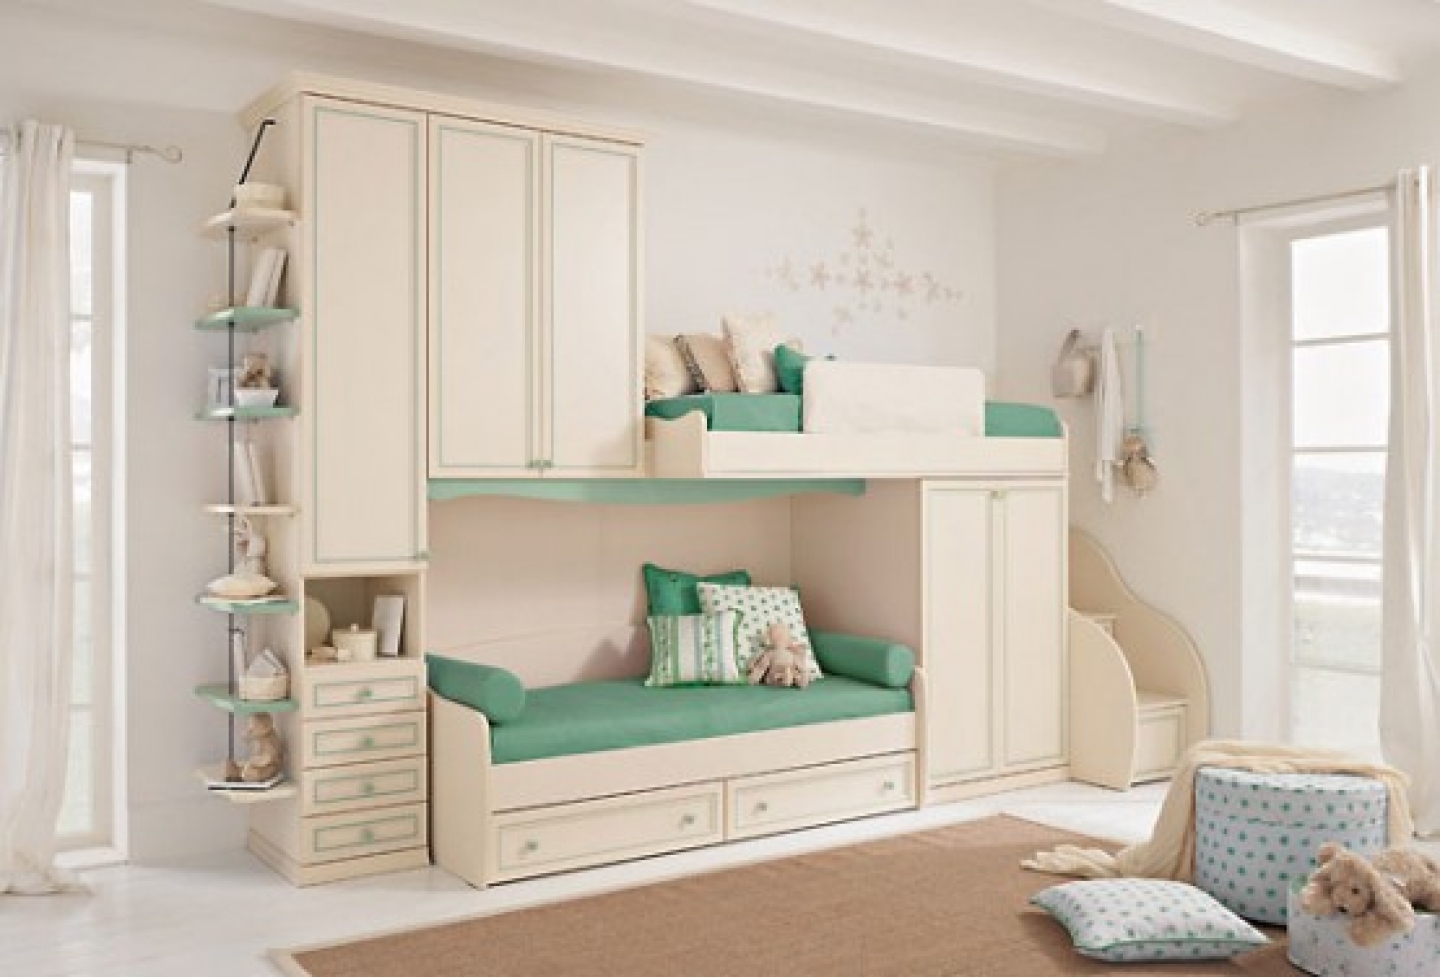 Bunk bed for a small room